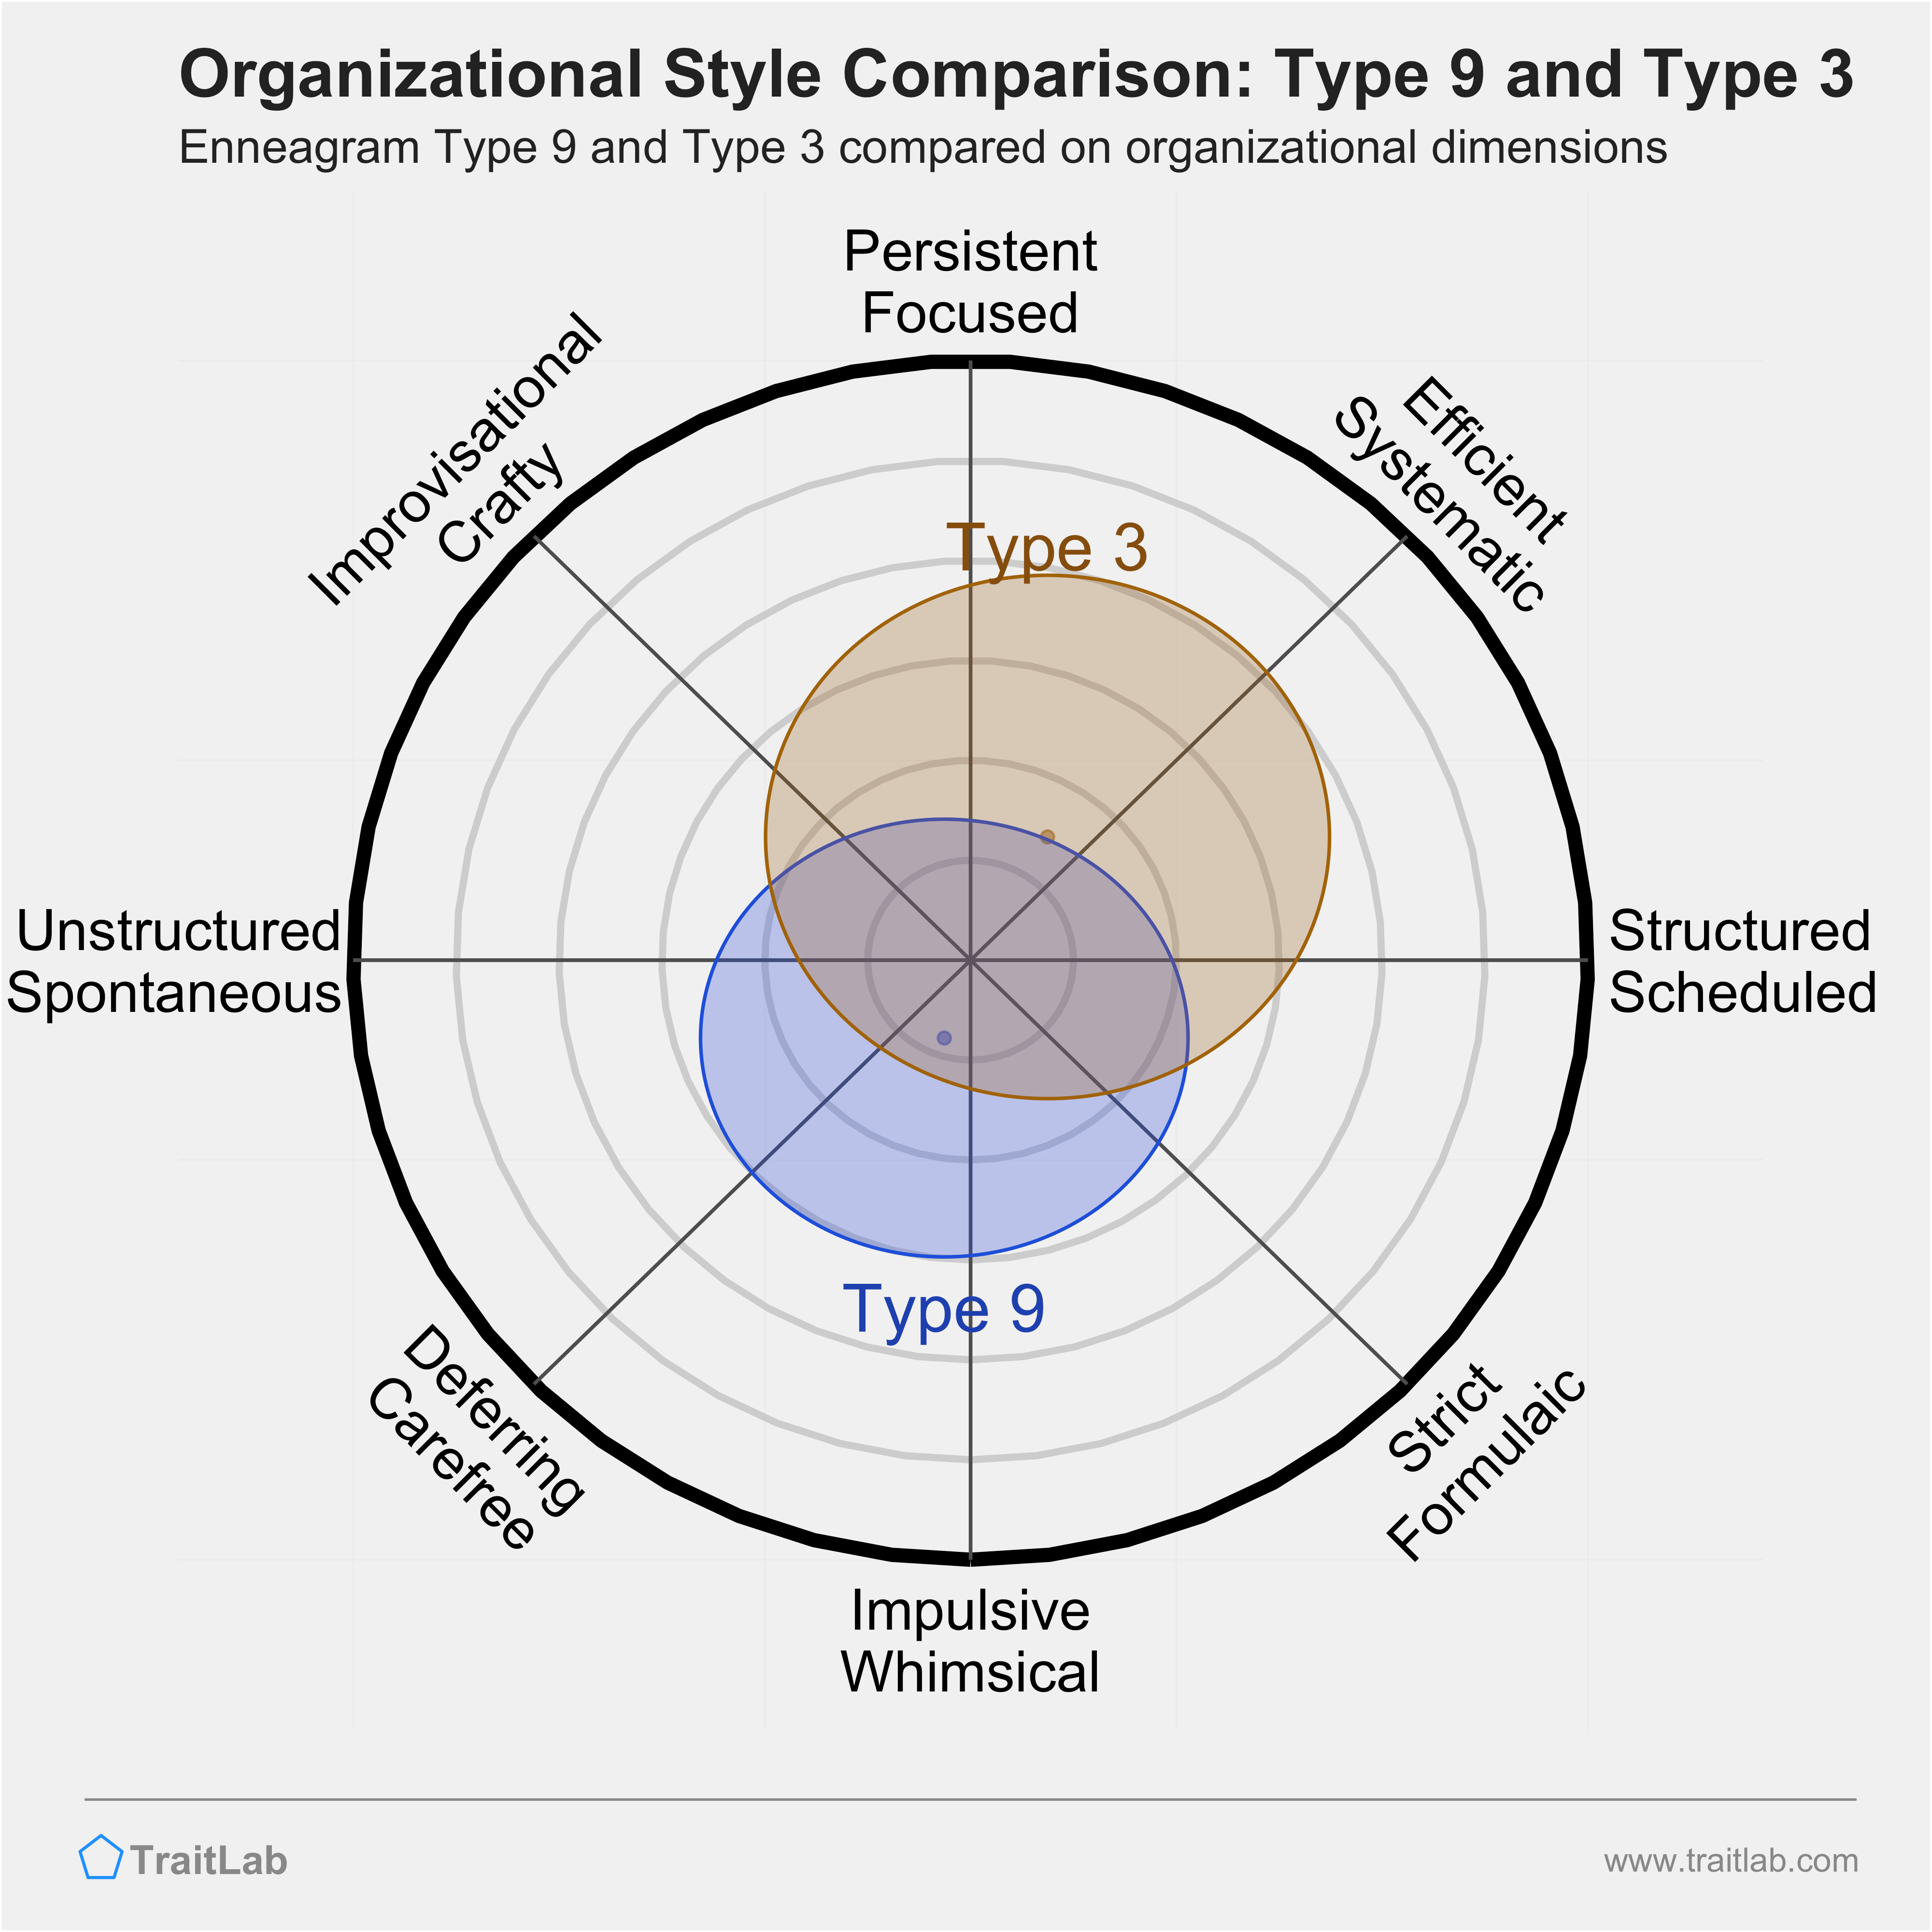 Type 9 and Type 3 comparison across organizational dimensions